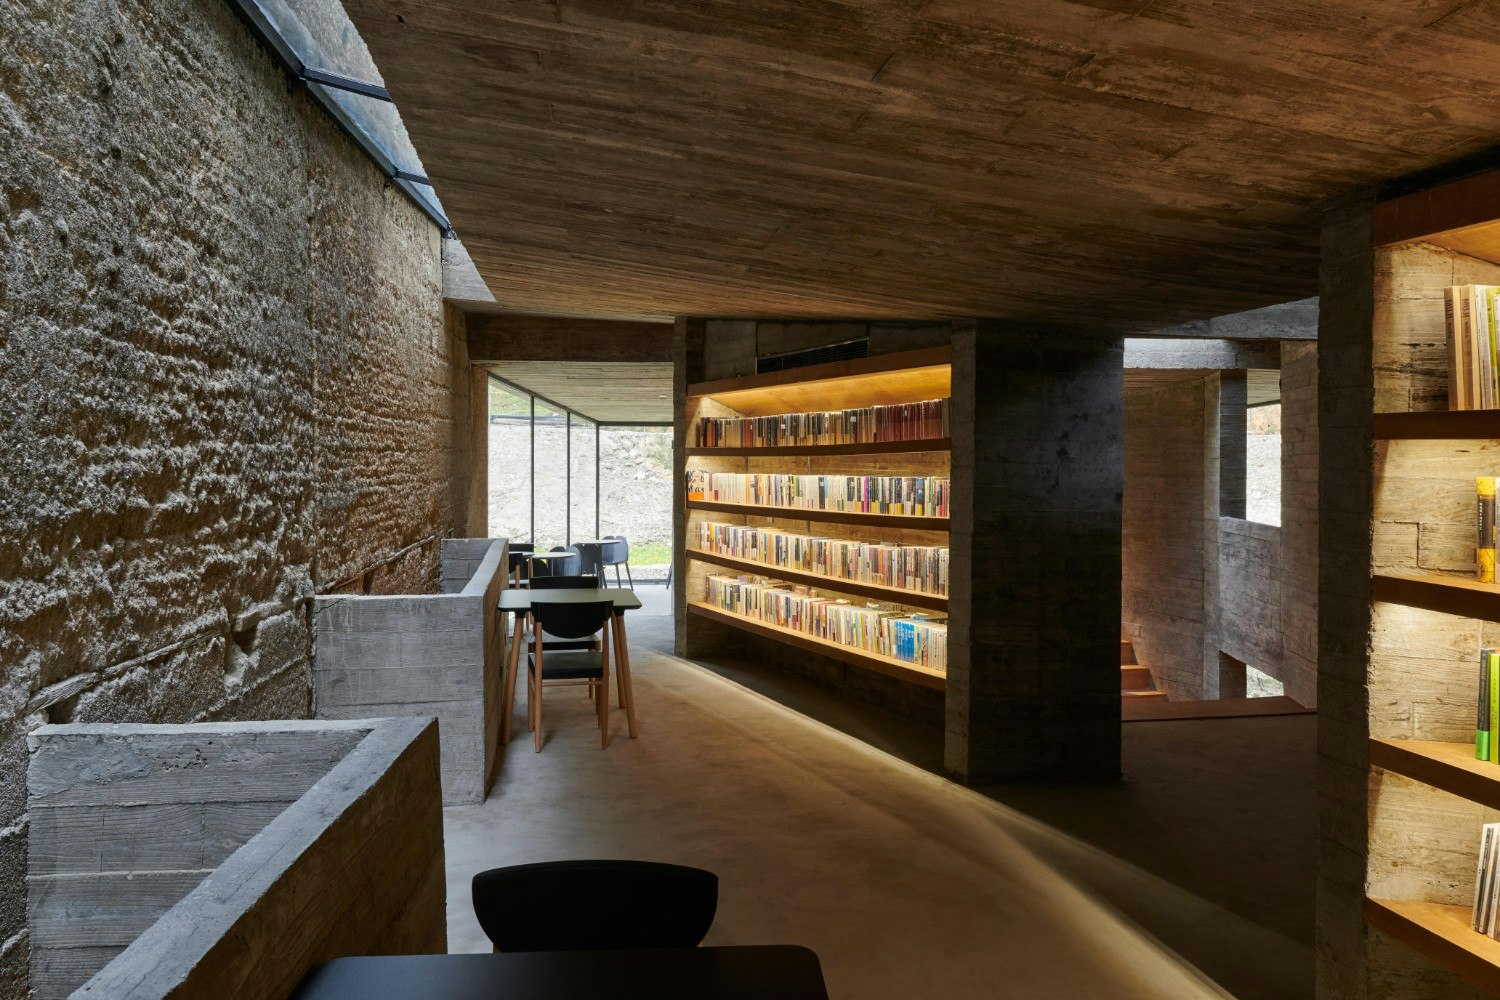 The second floor reading area at the Paddy Field Bookstore in China